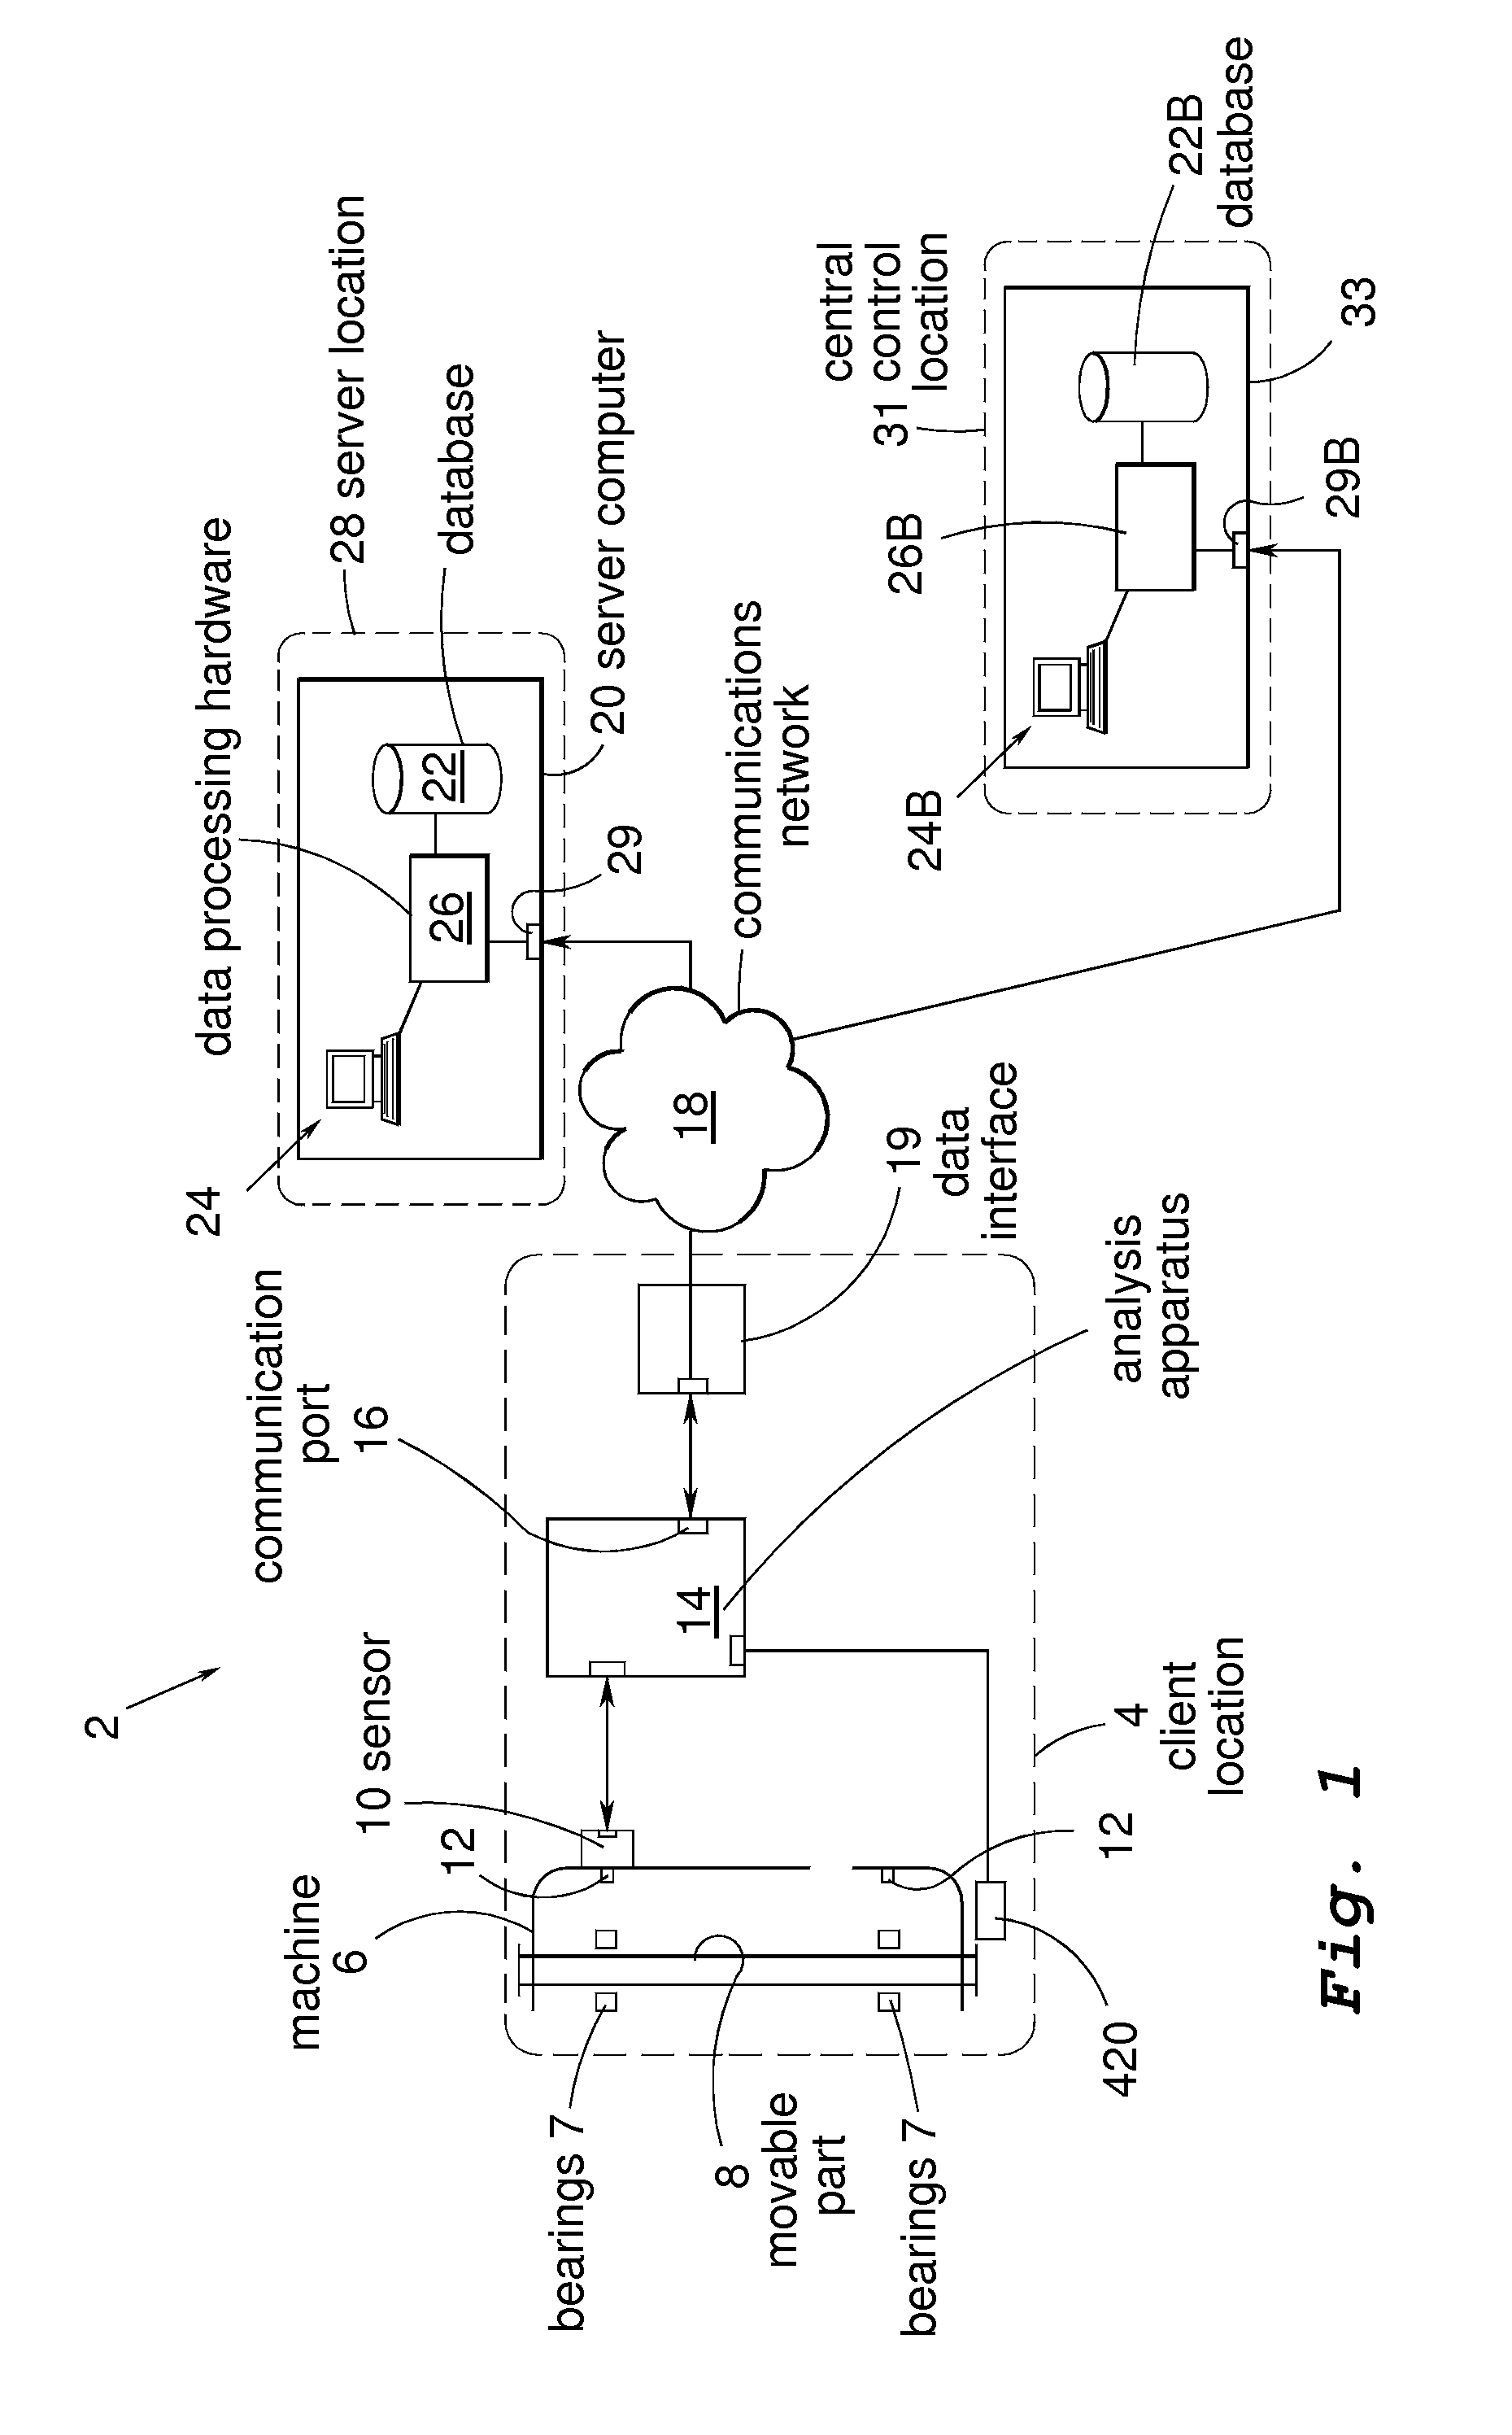 Apparatus and a method for analysing the vibration of a machine having a rotating part